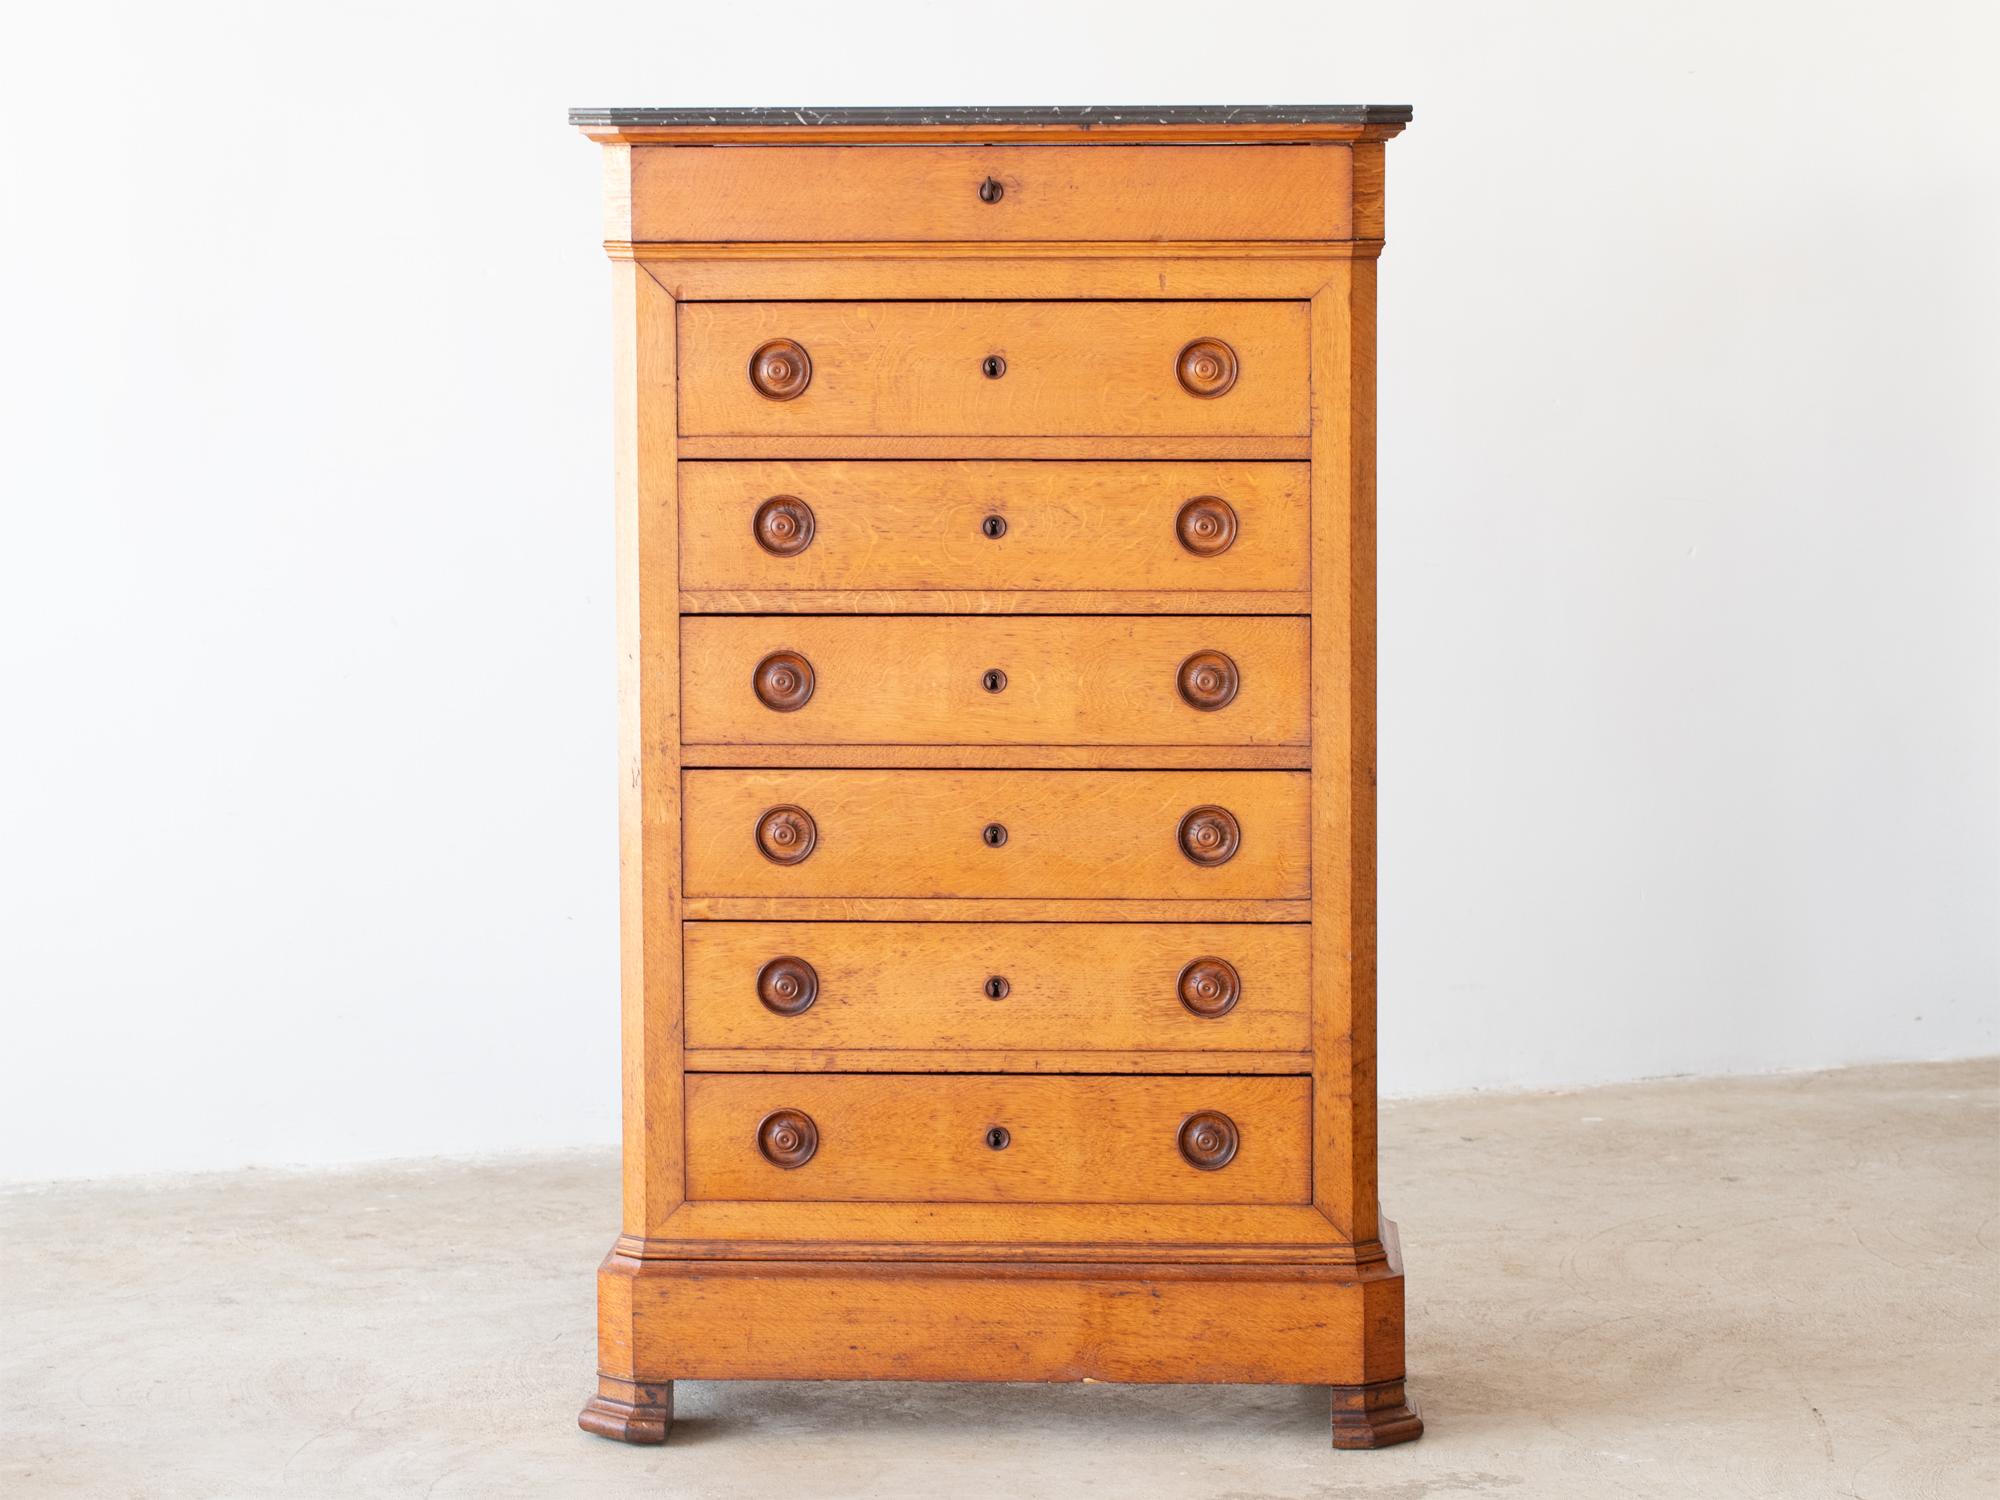 A Louis Philippe oak semainier or chest of seven drawers. French, c. 1840s.

In good sturdy order with wear consistent with age and use. Original black veined marble top and working locks with one shared key.

152 x 95 x 42 cm

59.8 x 37.4 x 16.5 